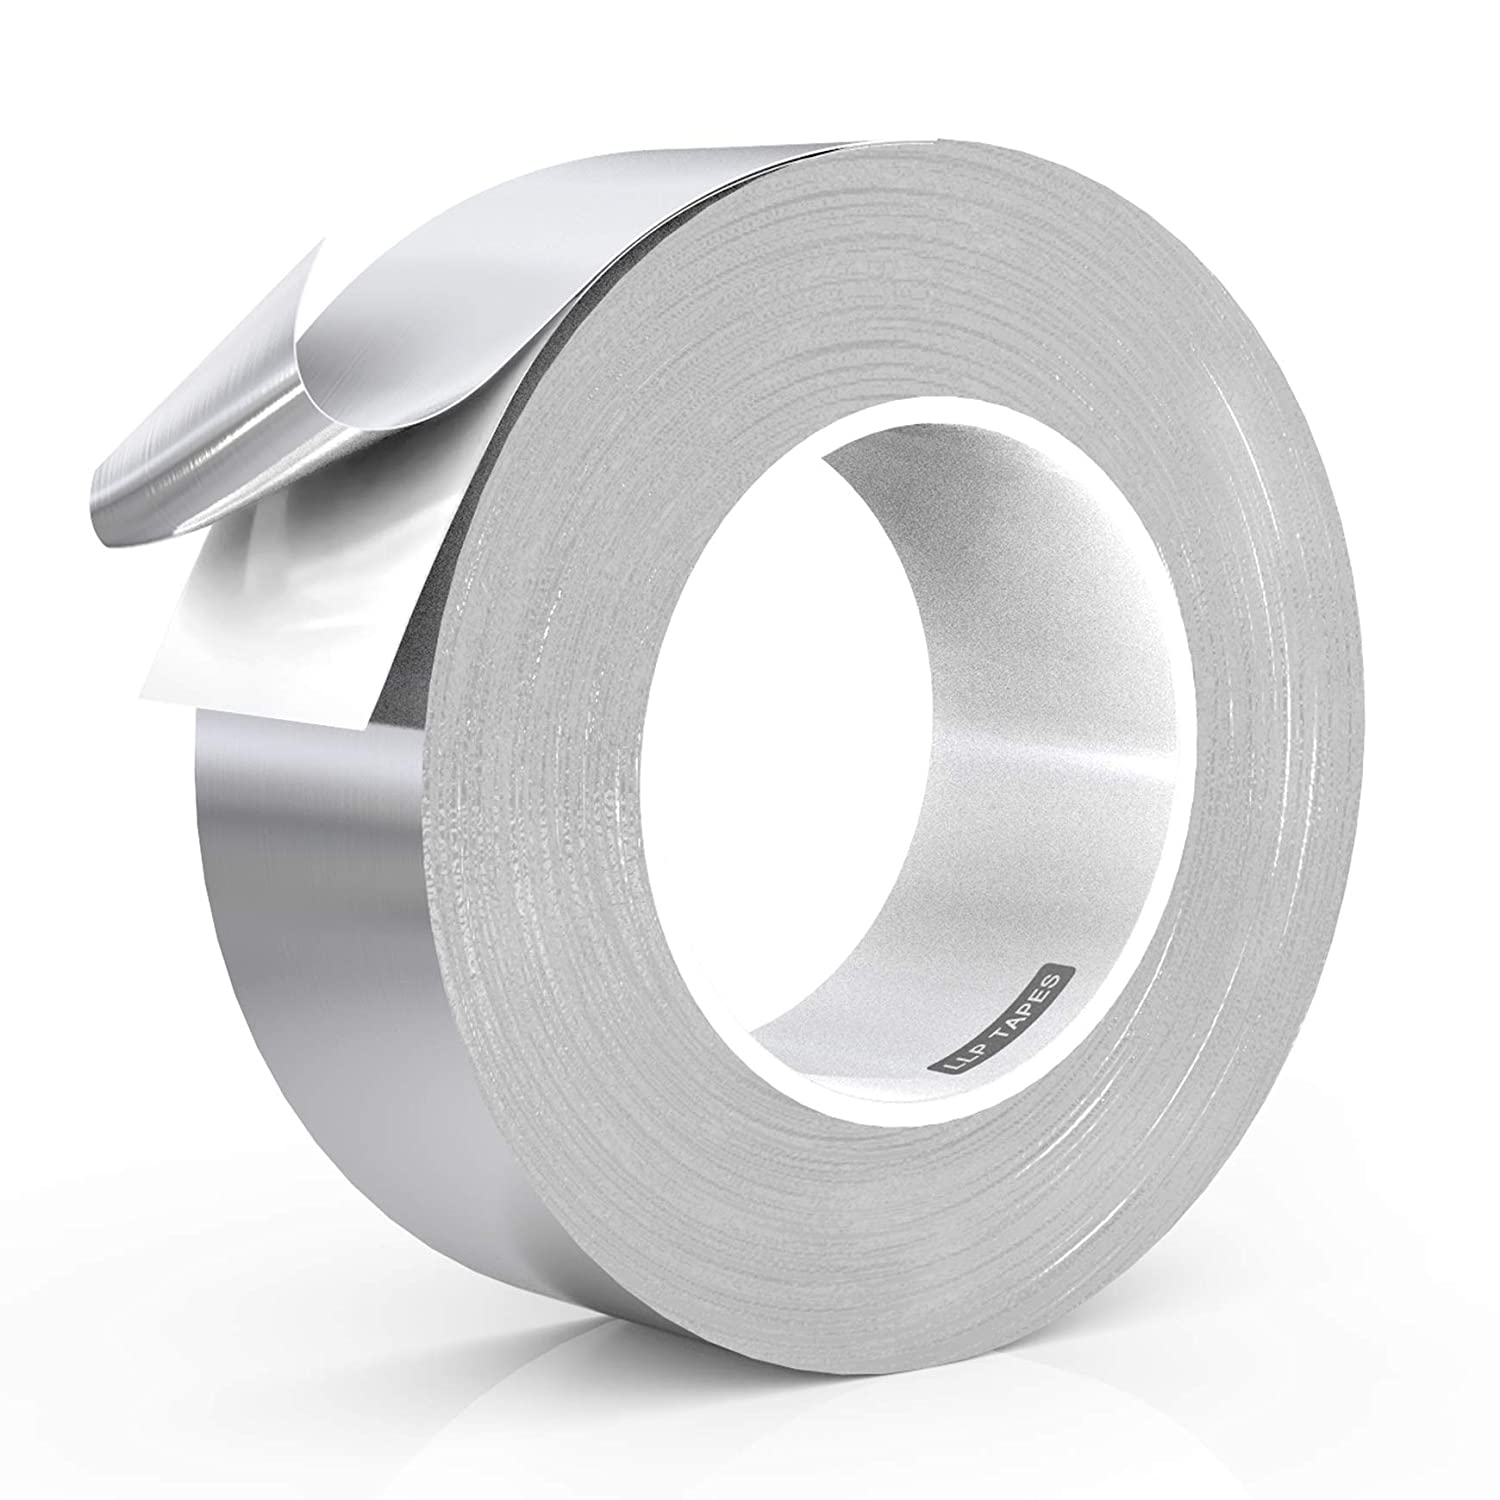 LLPT, LLPT Aluminum Foil Tape 2 Inches x 108 Feet 5.9 Mil Extra Thick Strong Adhesive HVAC Sealing Hot Cold Air Duct Tape for Pipe Metal Repair